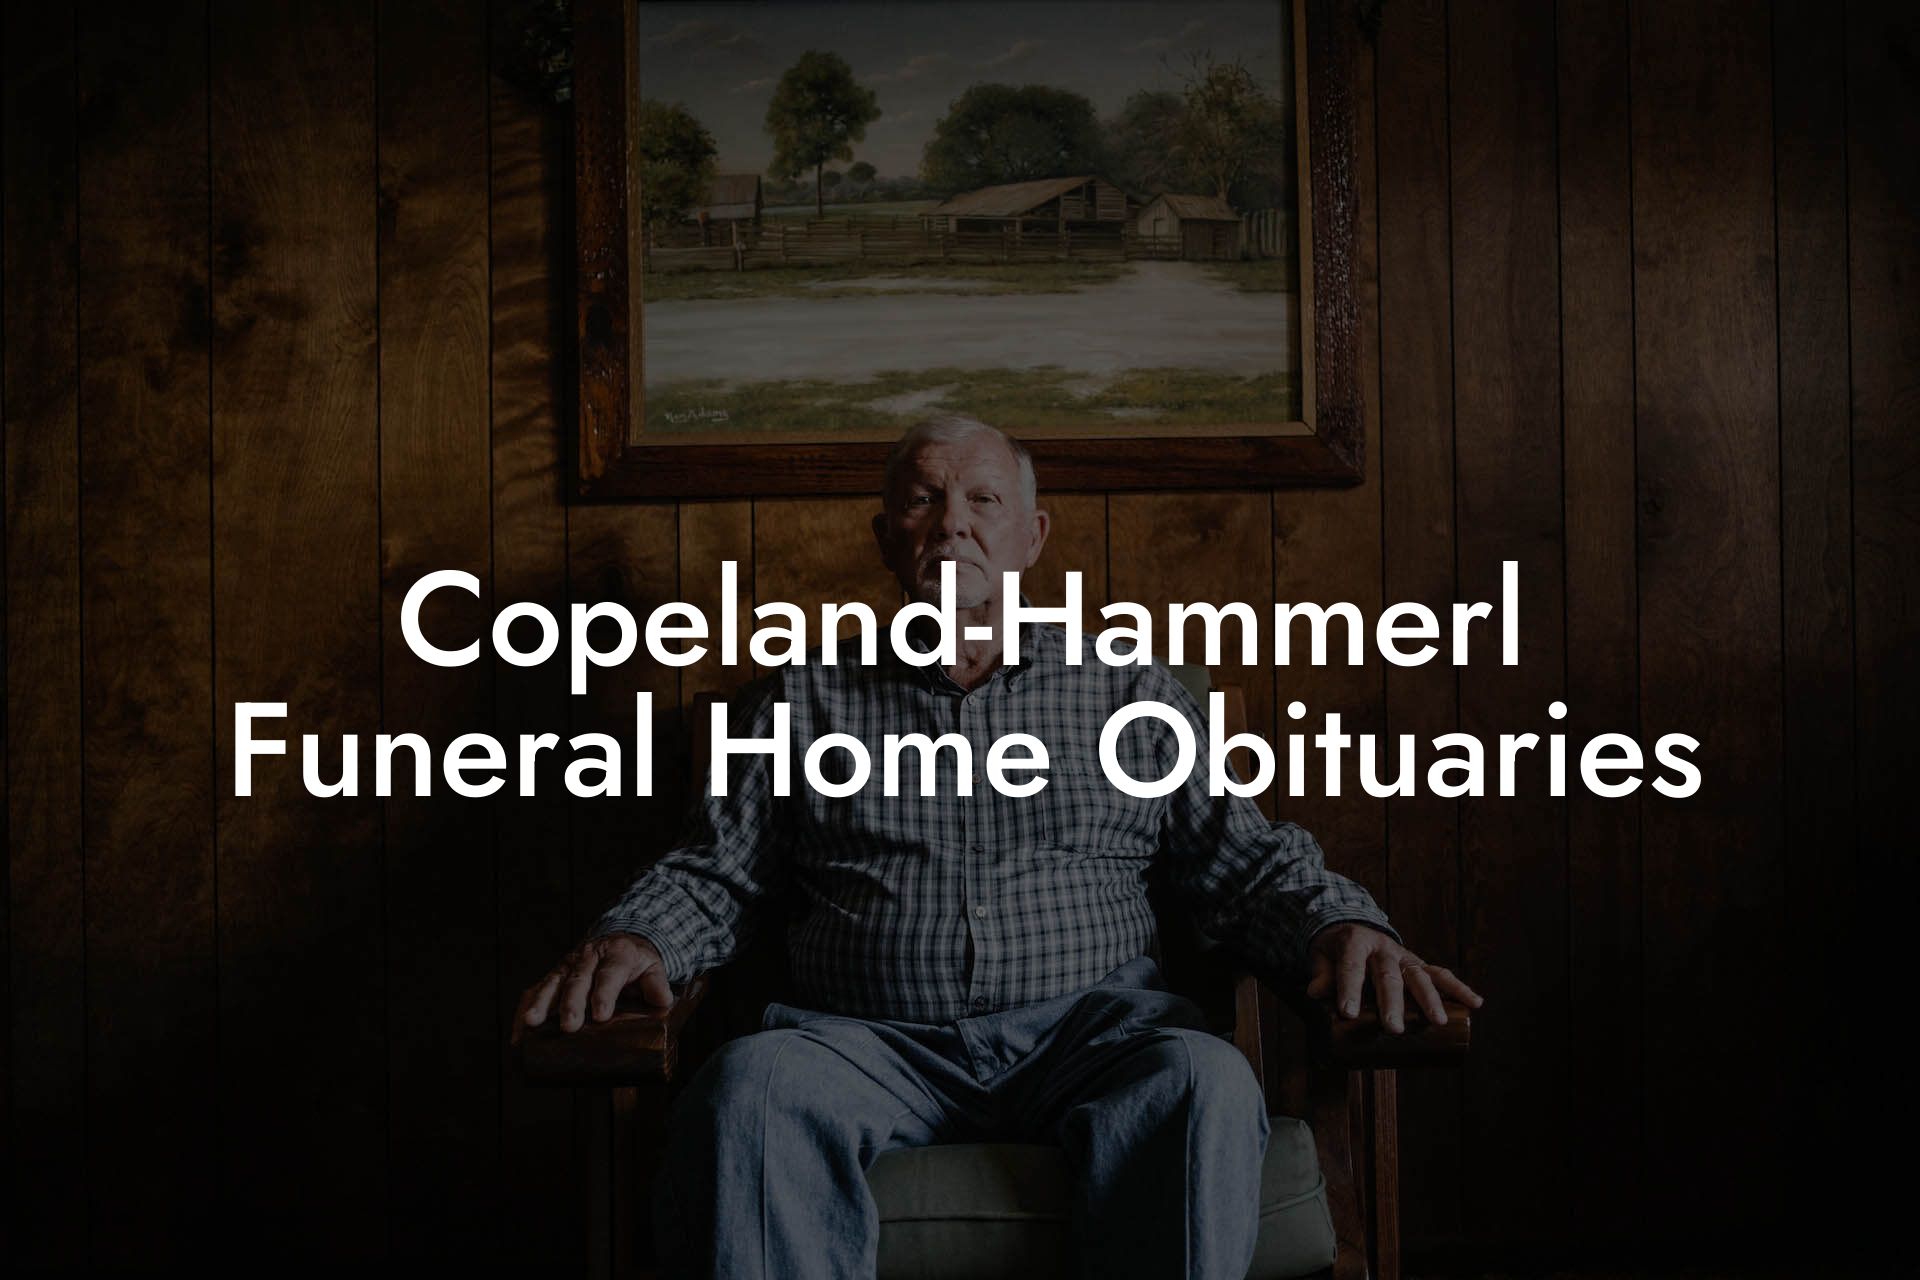 Copeland-Hammerl Funeral Home Obituaries